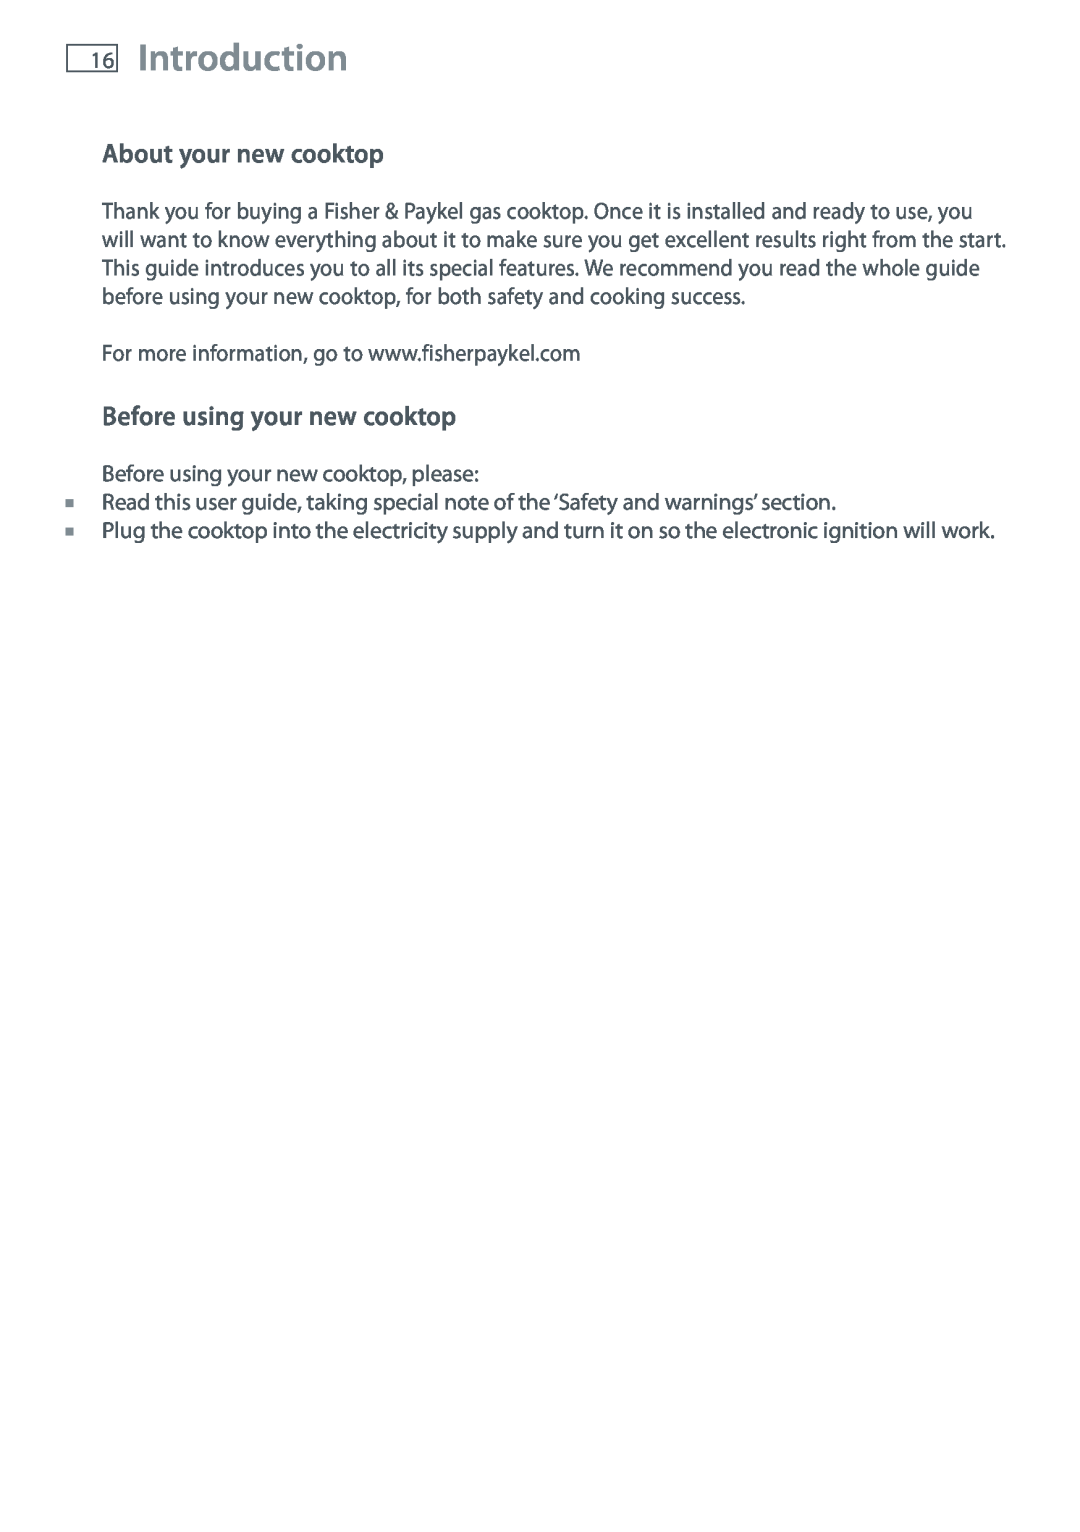 Fisher & Paykel CG604 installation instructions Introduction, About your new cooktop, Before using your new cooktop 